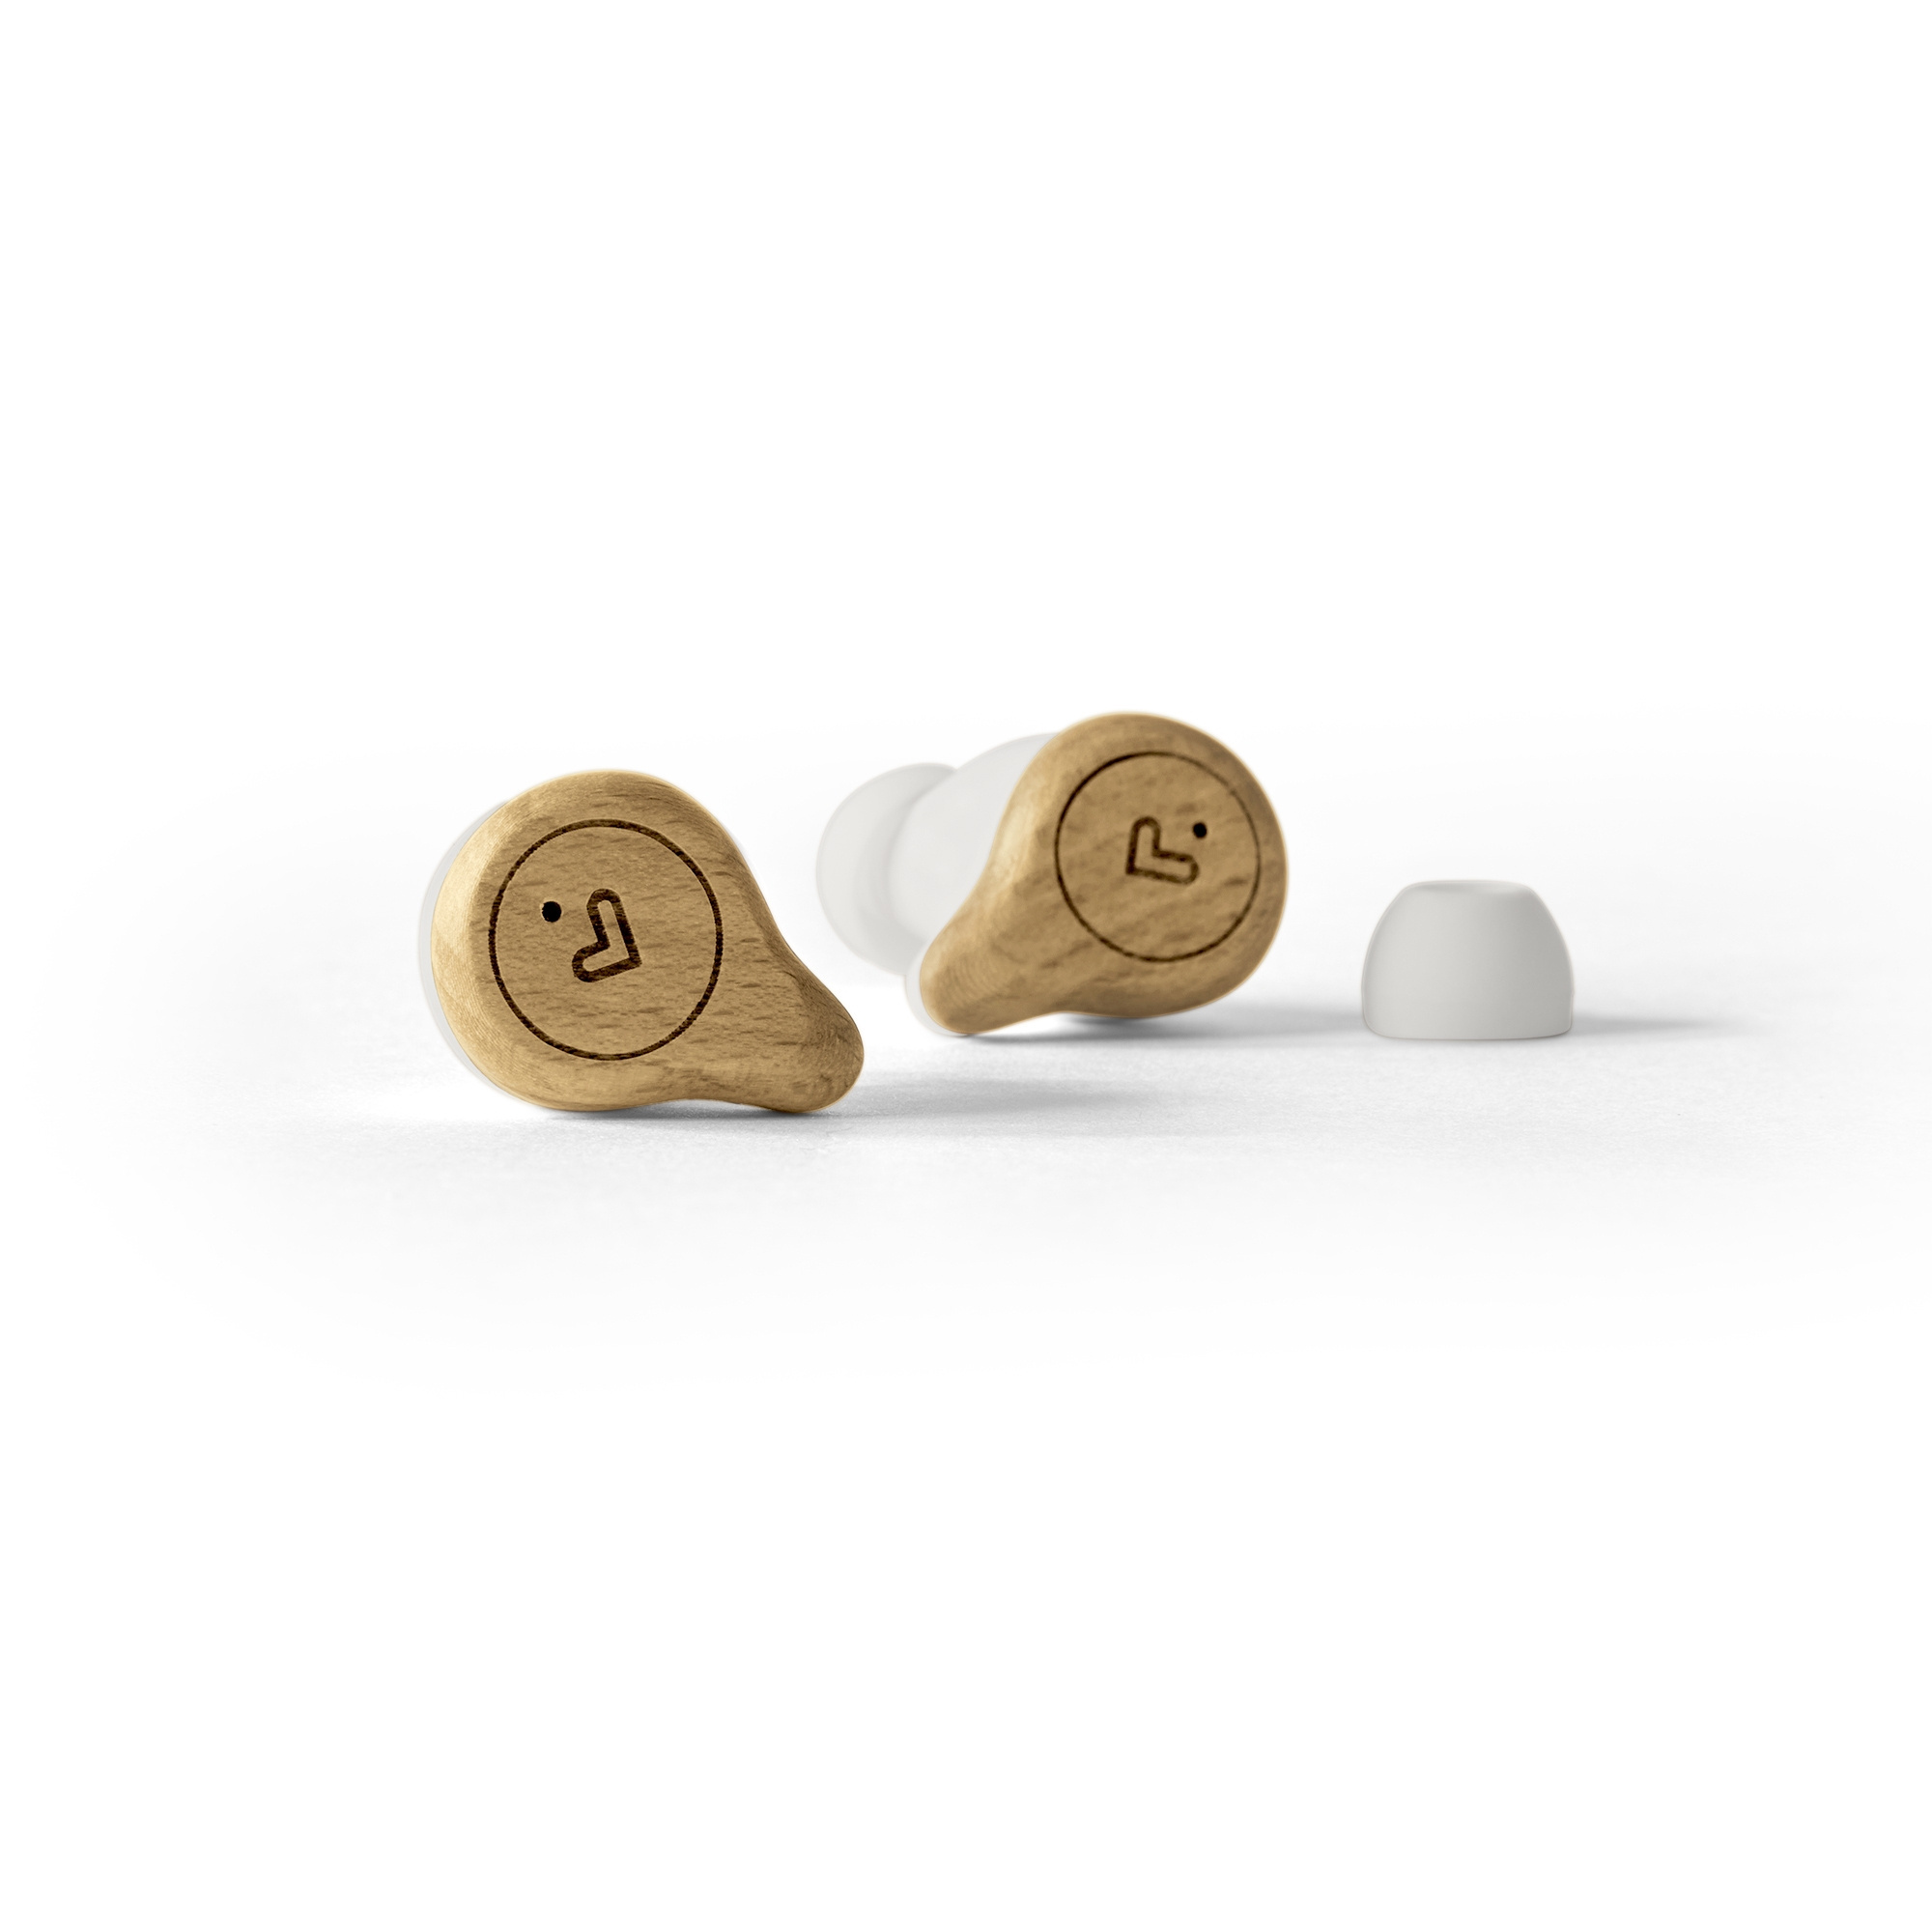 Earbuds made from wood coming from FSC forests